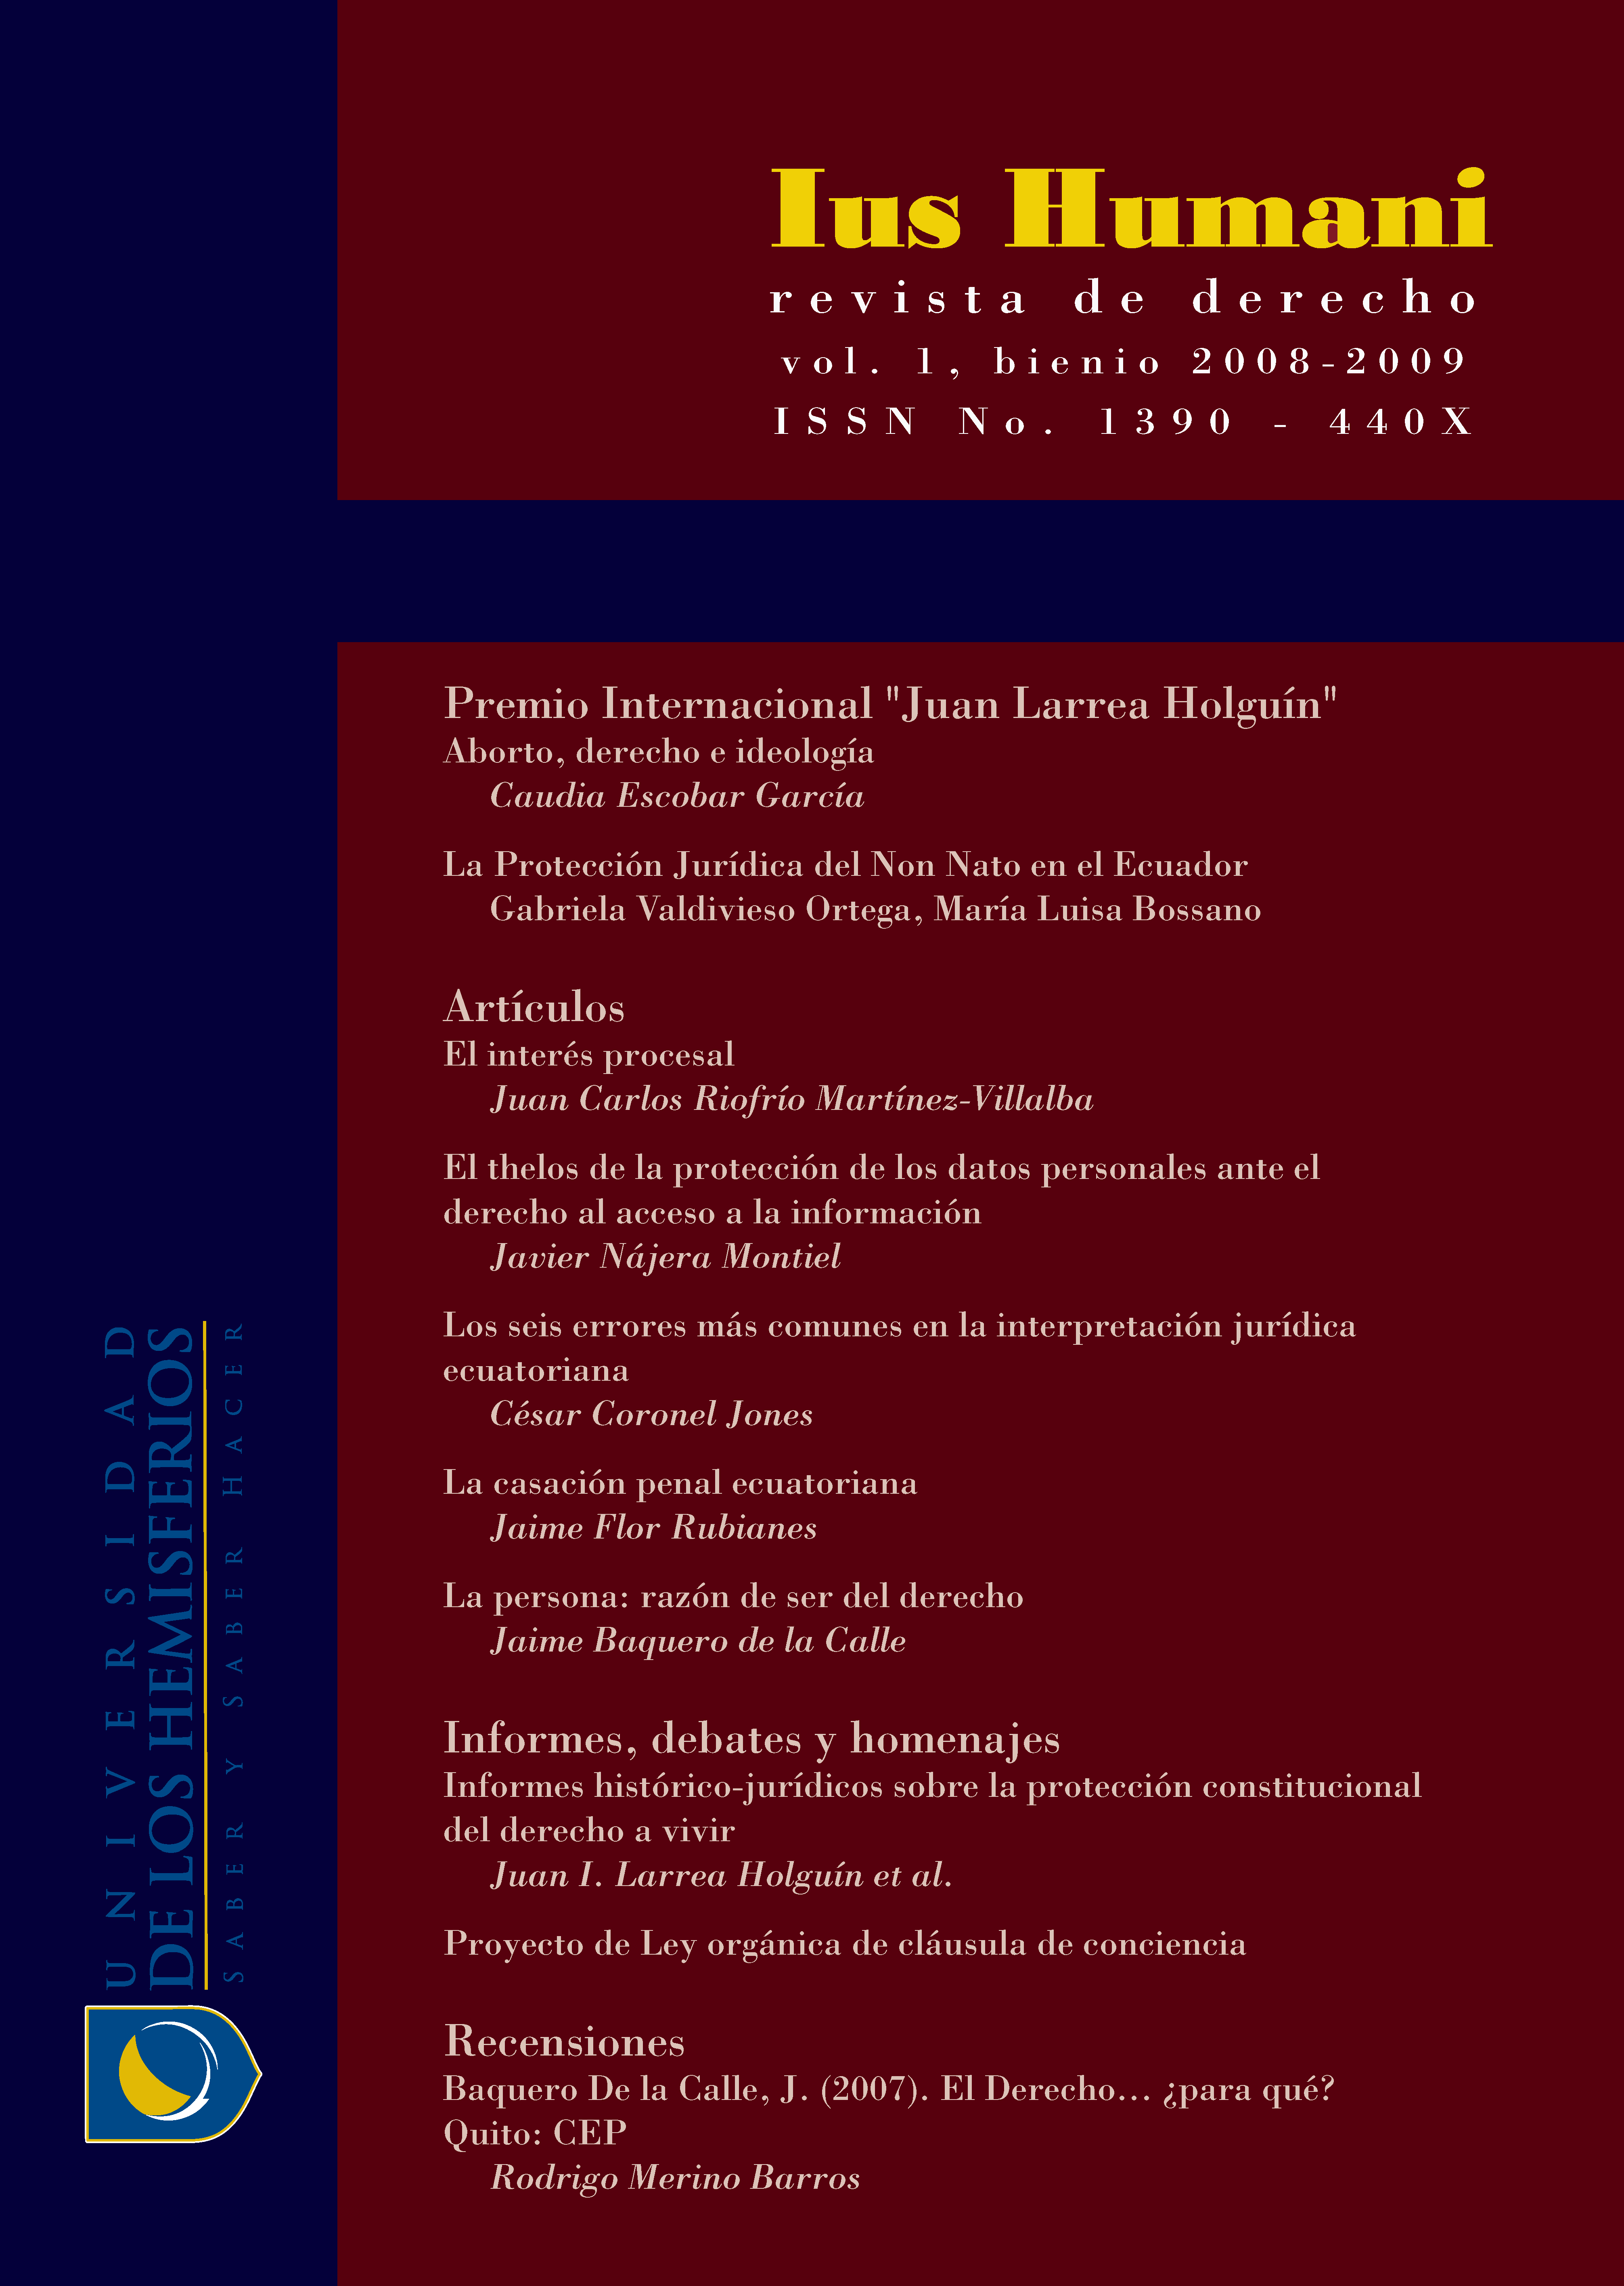 "First volume of Ius Humani Law Journal"